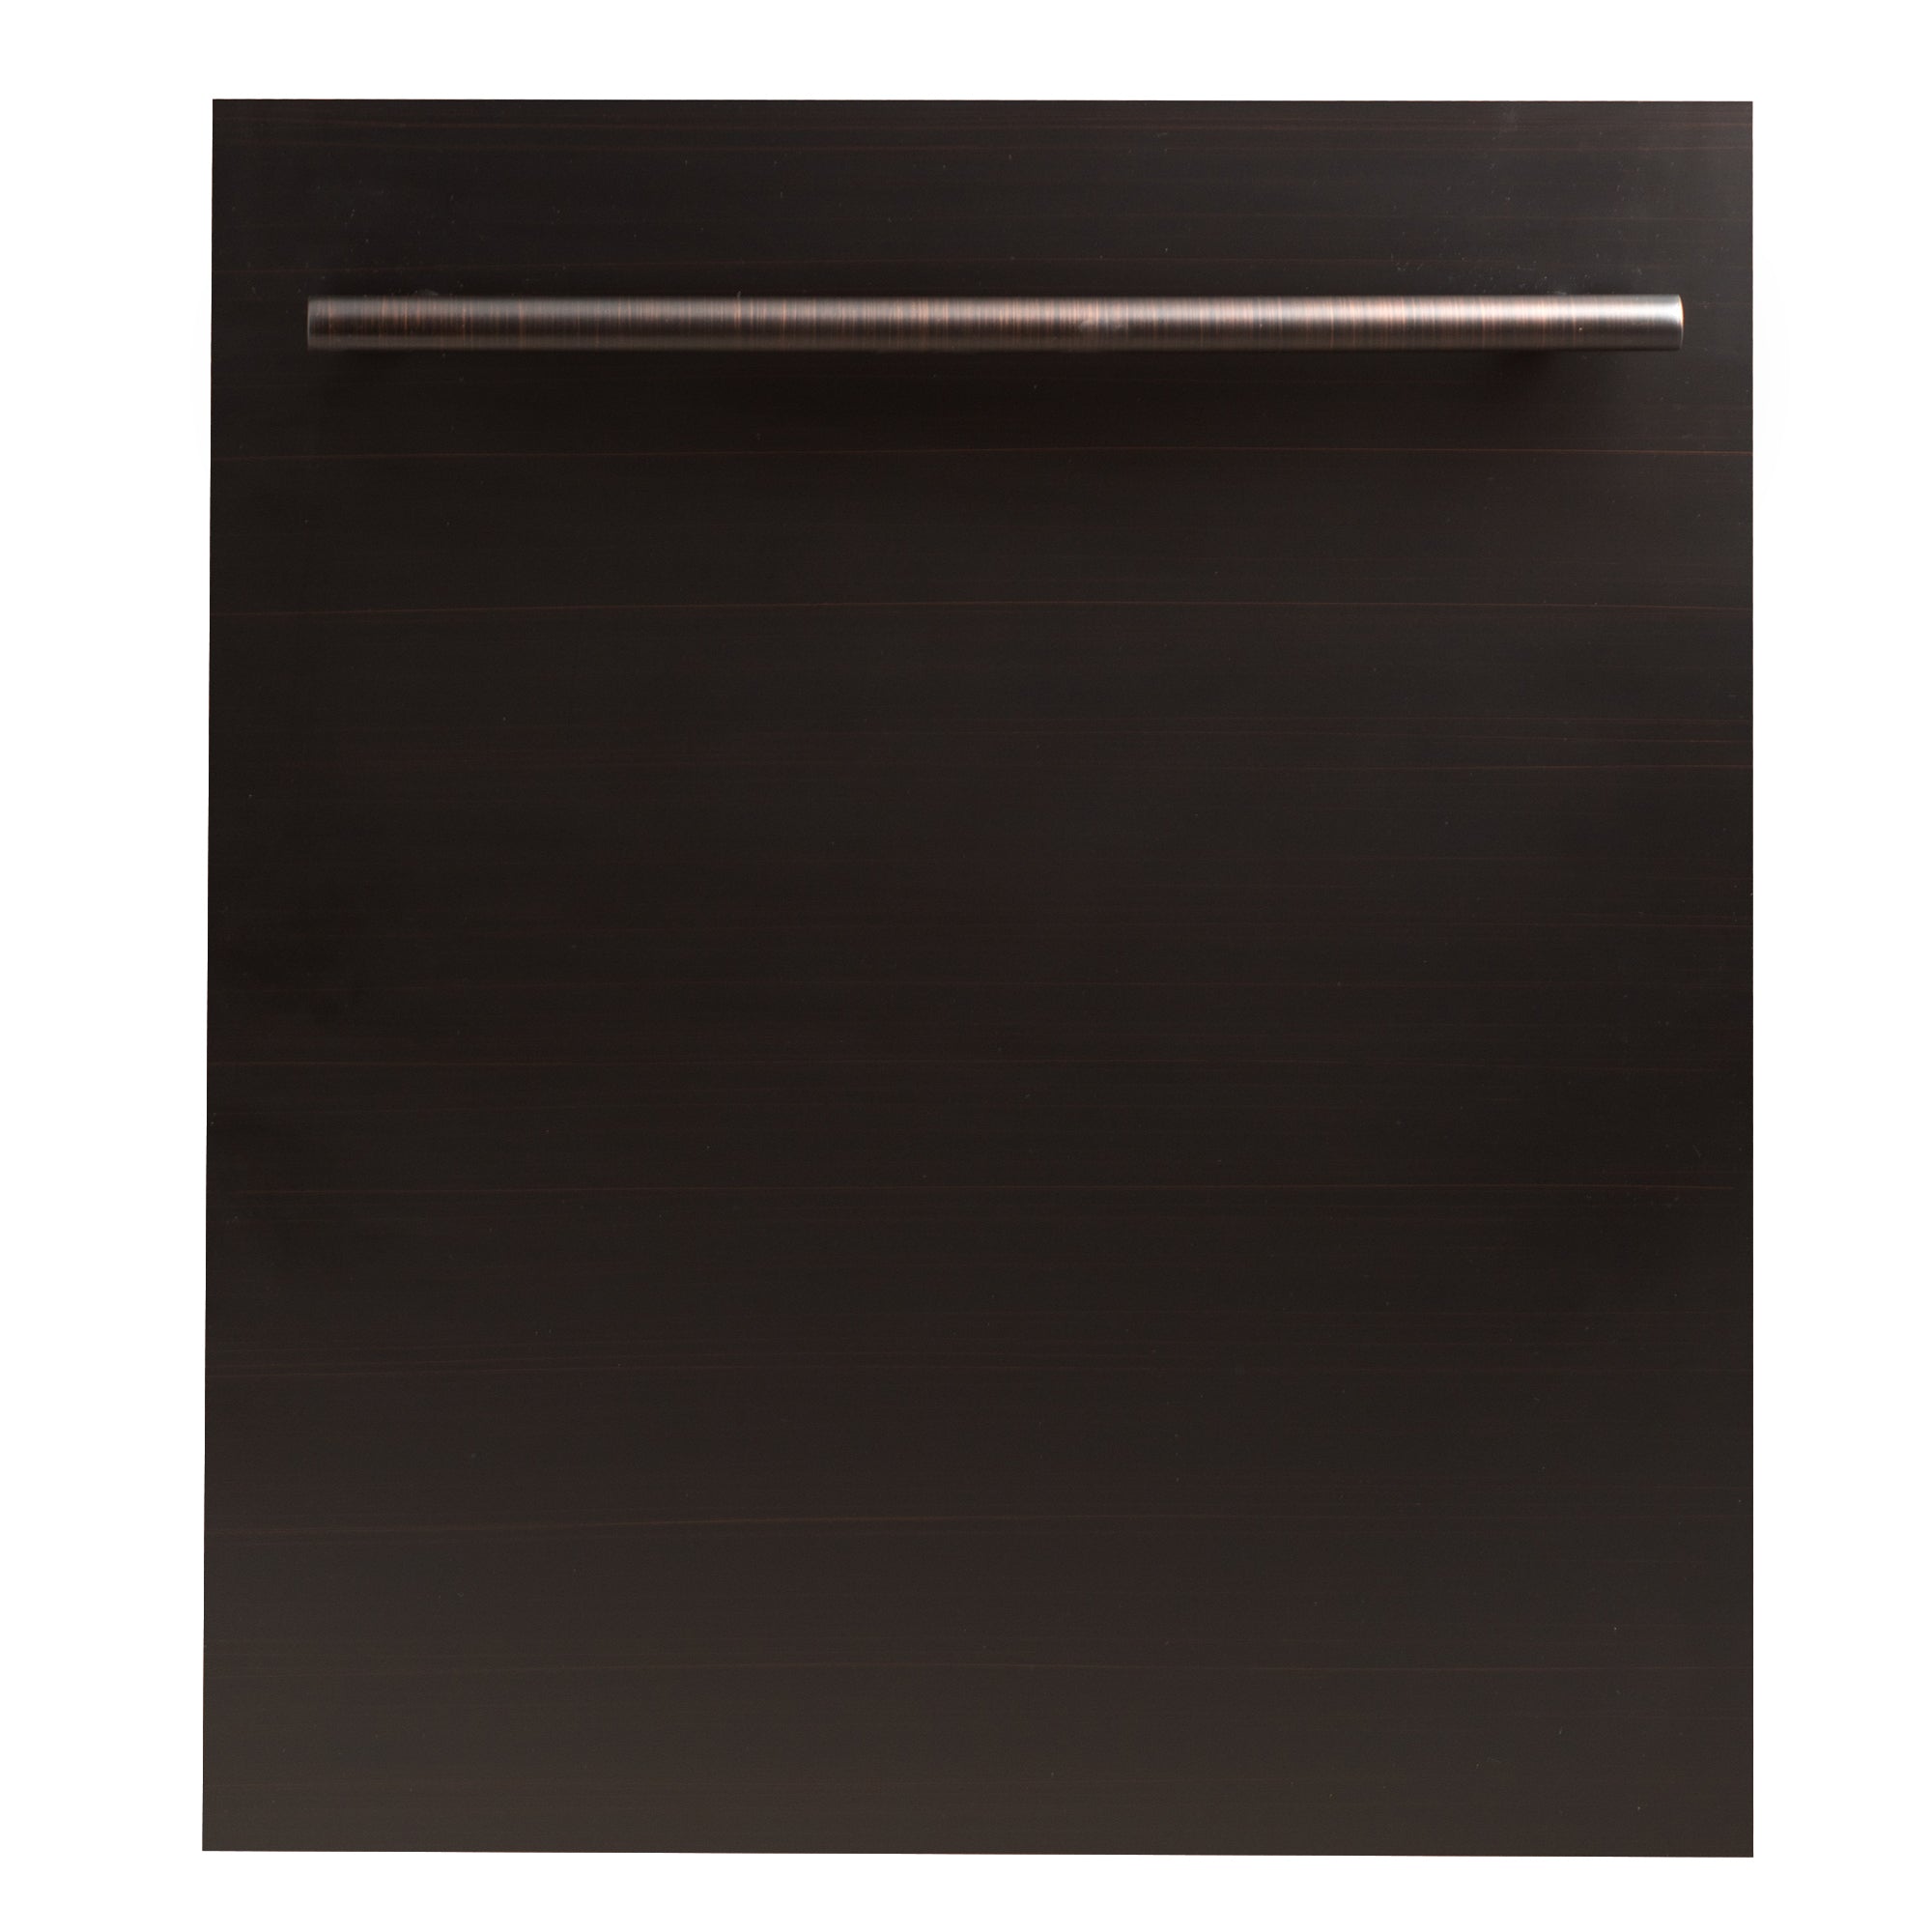 ZLINE 24" Dishwasher Panel in Oil Rubbed Bronze with Modern Handle (DP-ORB-24)